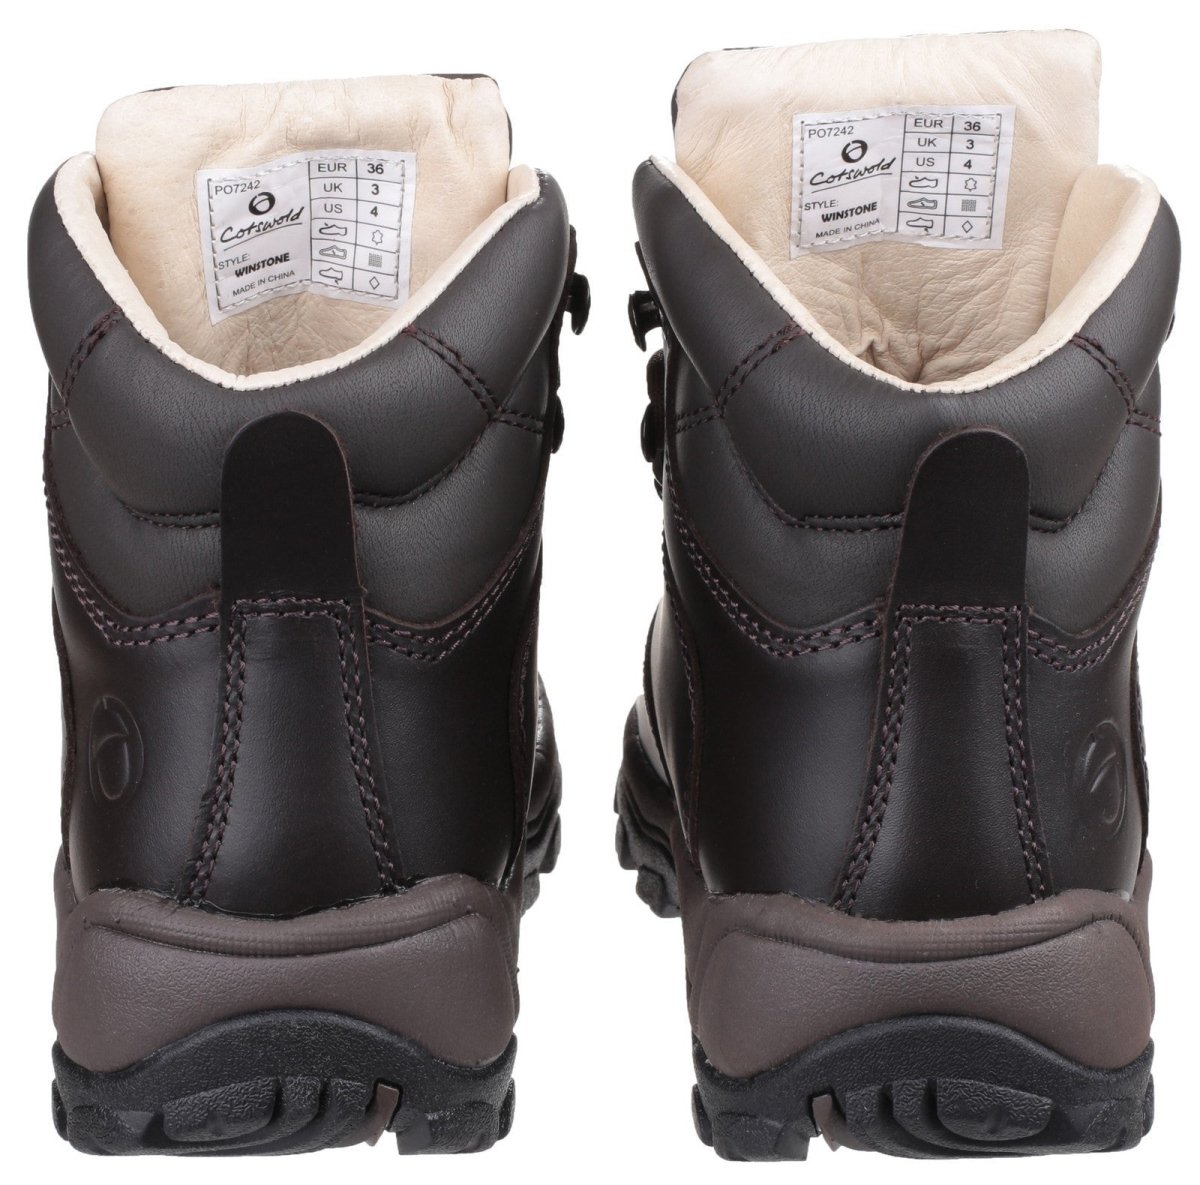 Cotswold Winstone Boot Ladies Hiking Boots - Shoe Store Direct